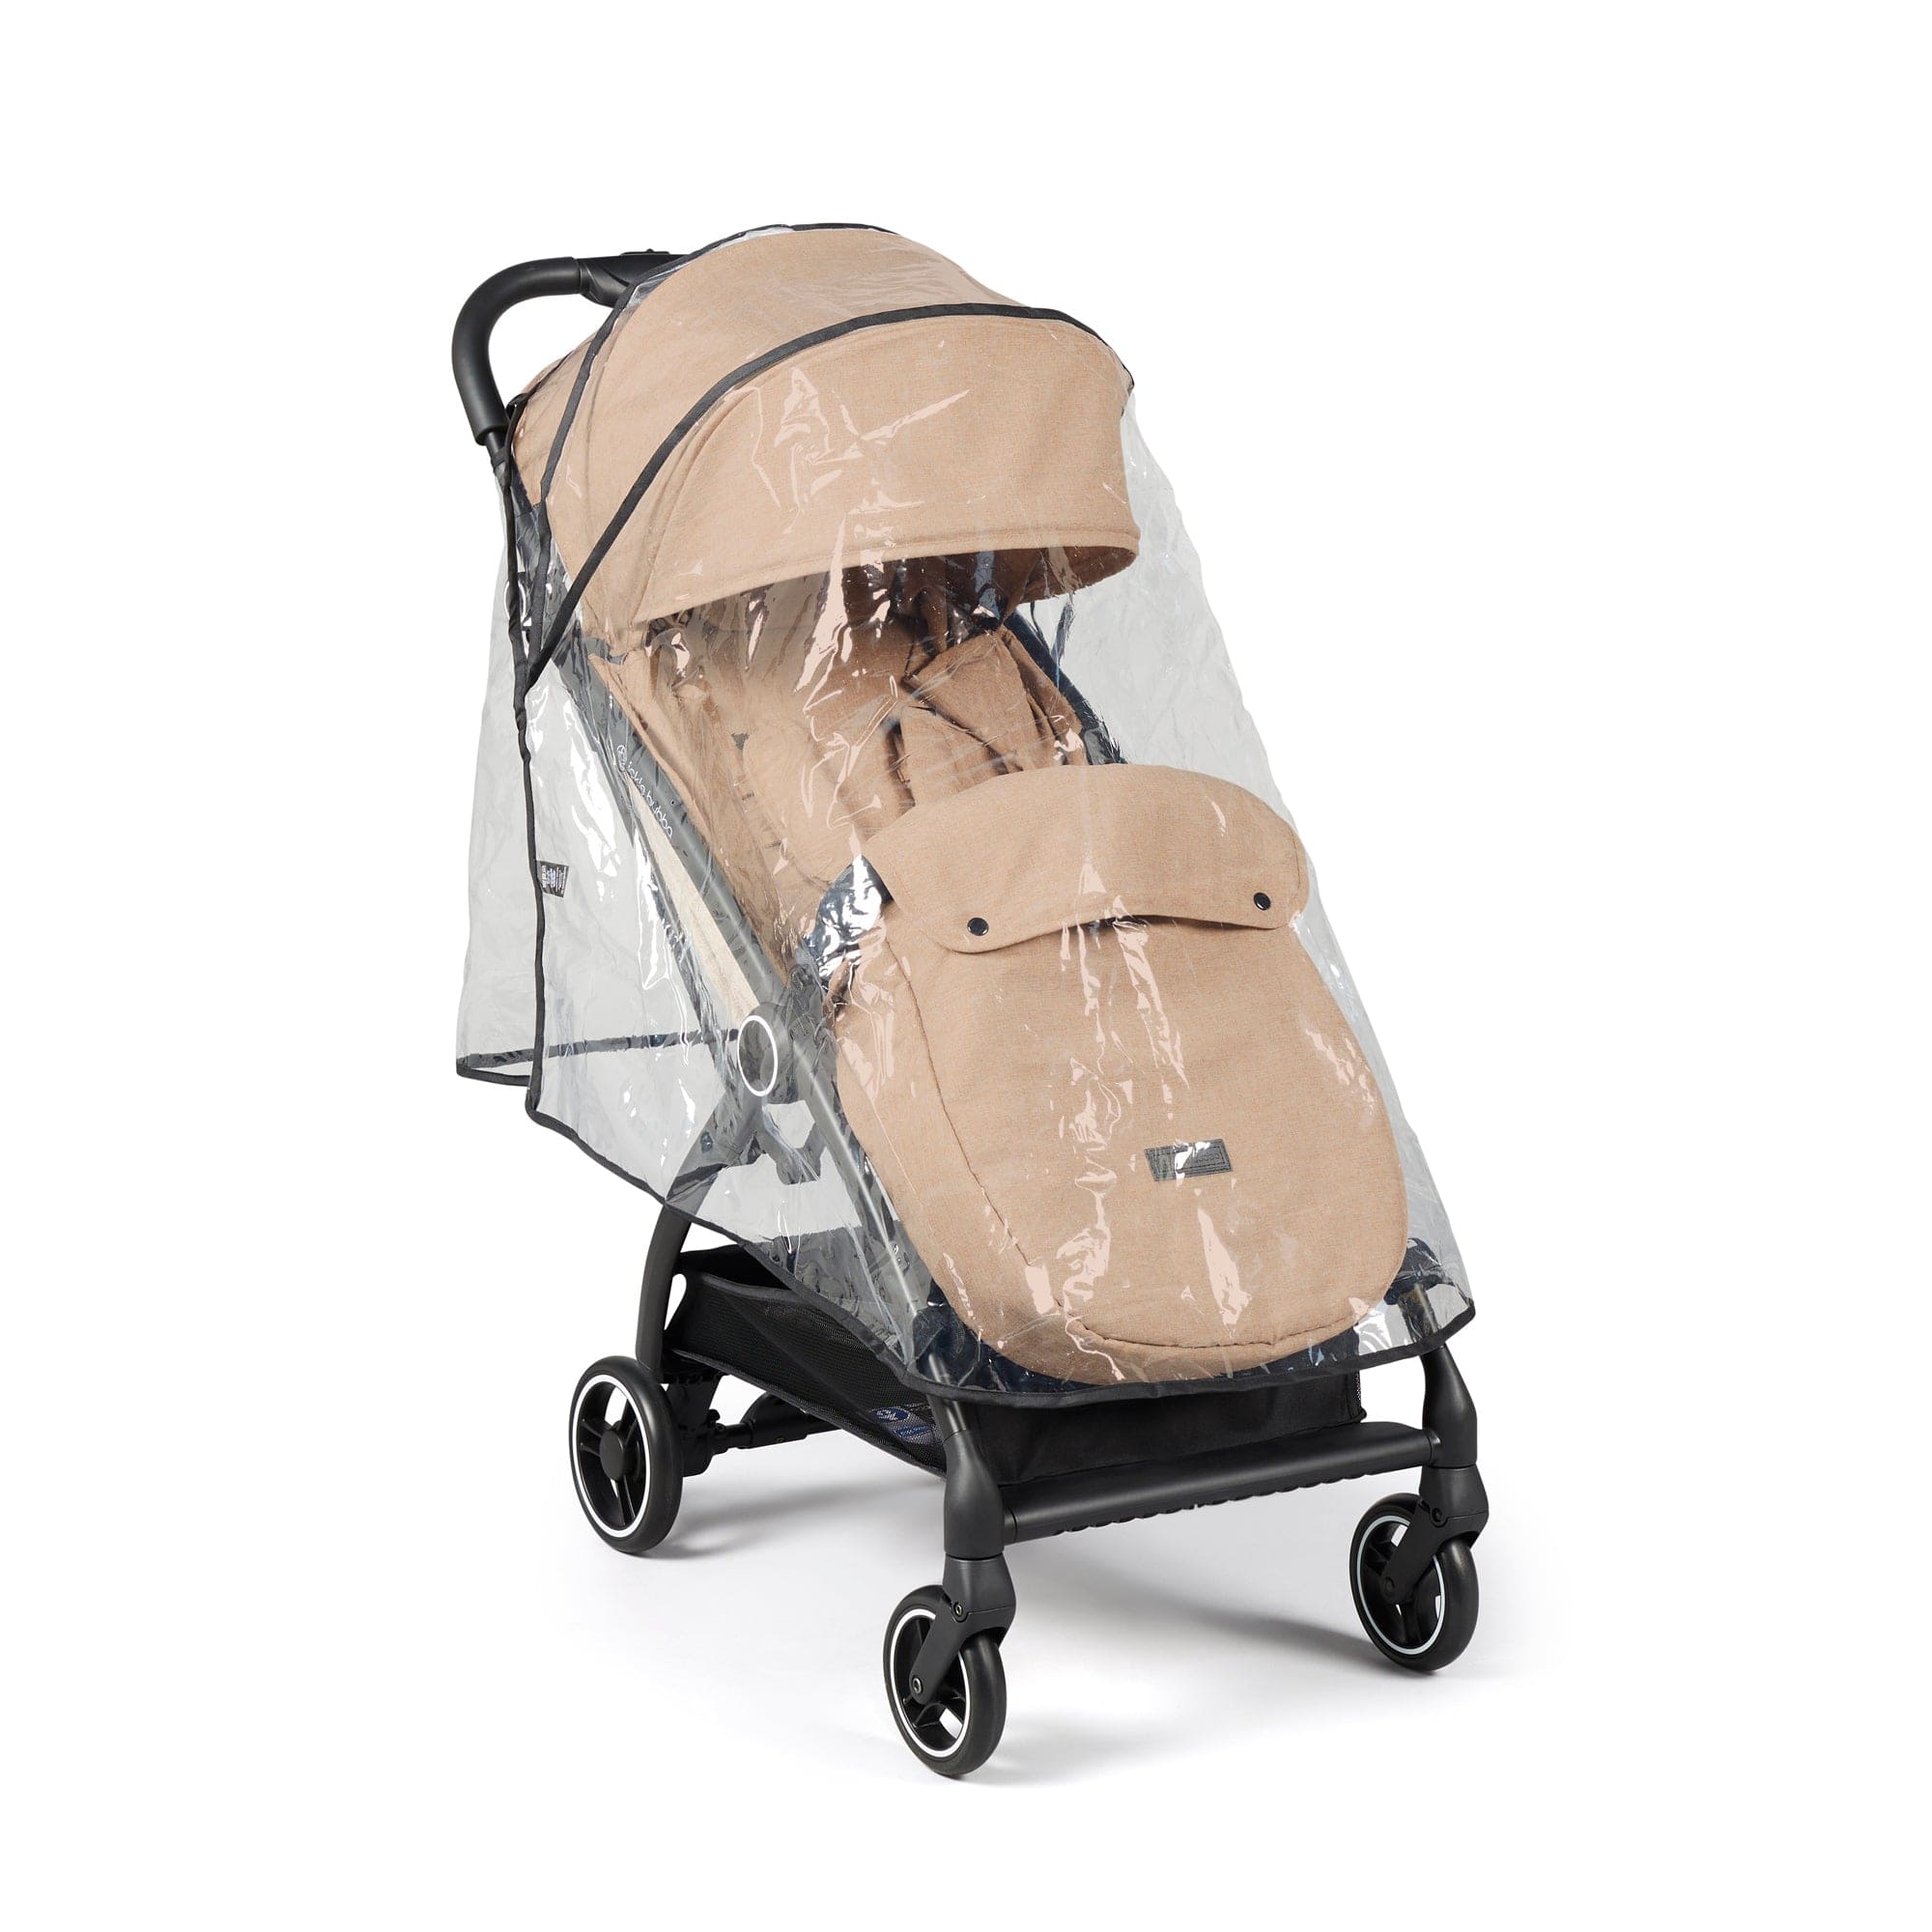 Ickle Bubba Aries Prime Autofold Stroller in Biscuit Pushchairs & Buggies 15-005-300-157 5056515031317